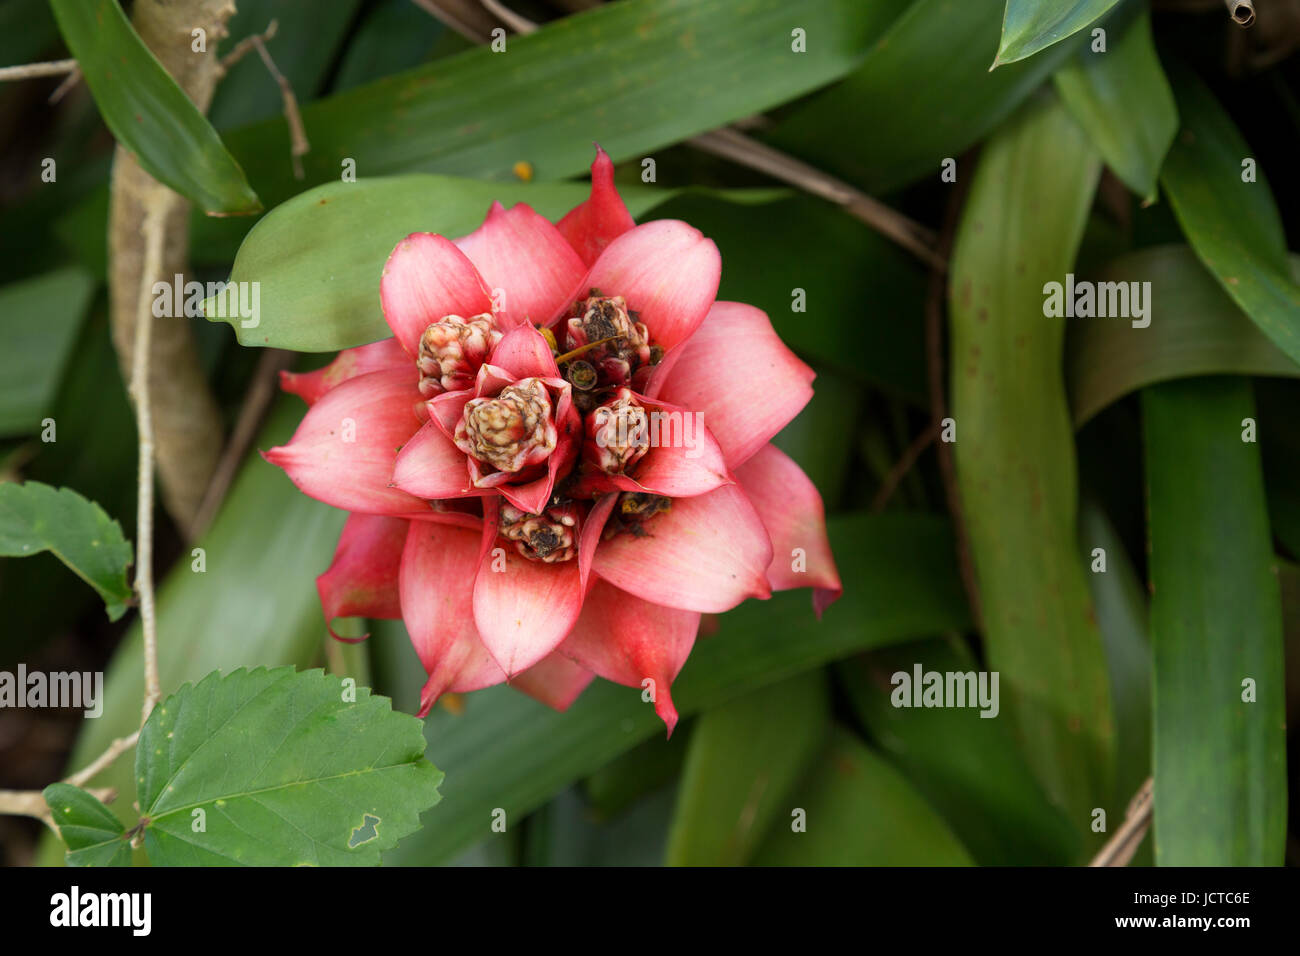 Tropical flowering plant on the island of Maui, Hawaii. Coral color tropical flower. Stock Photo